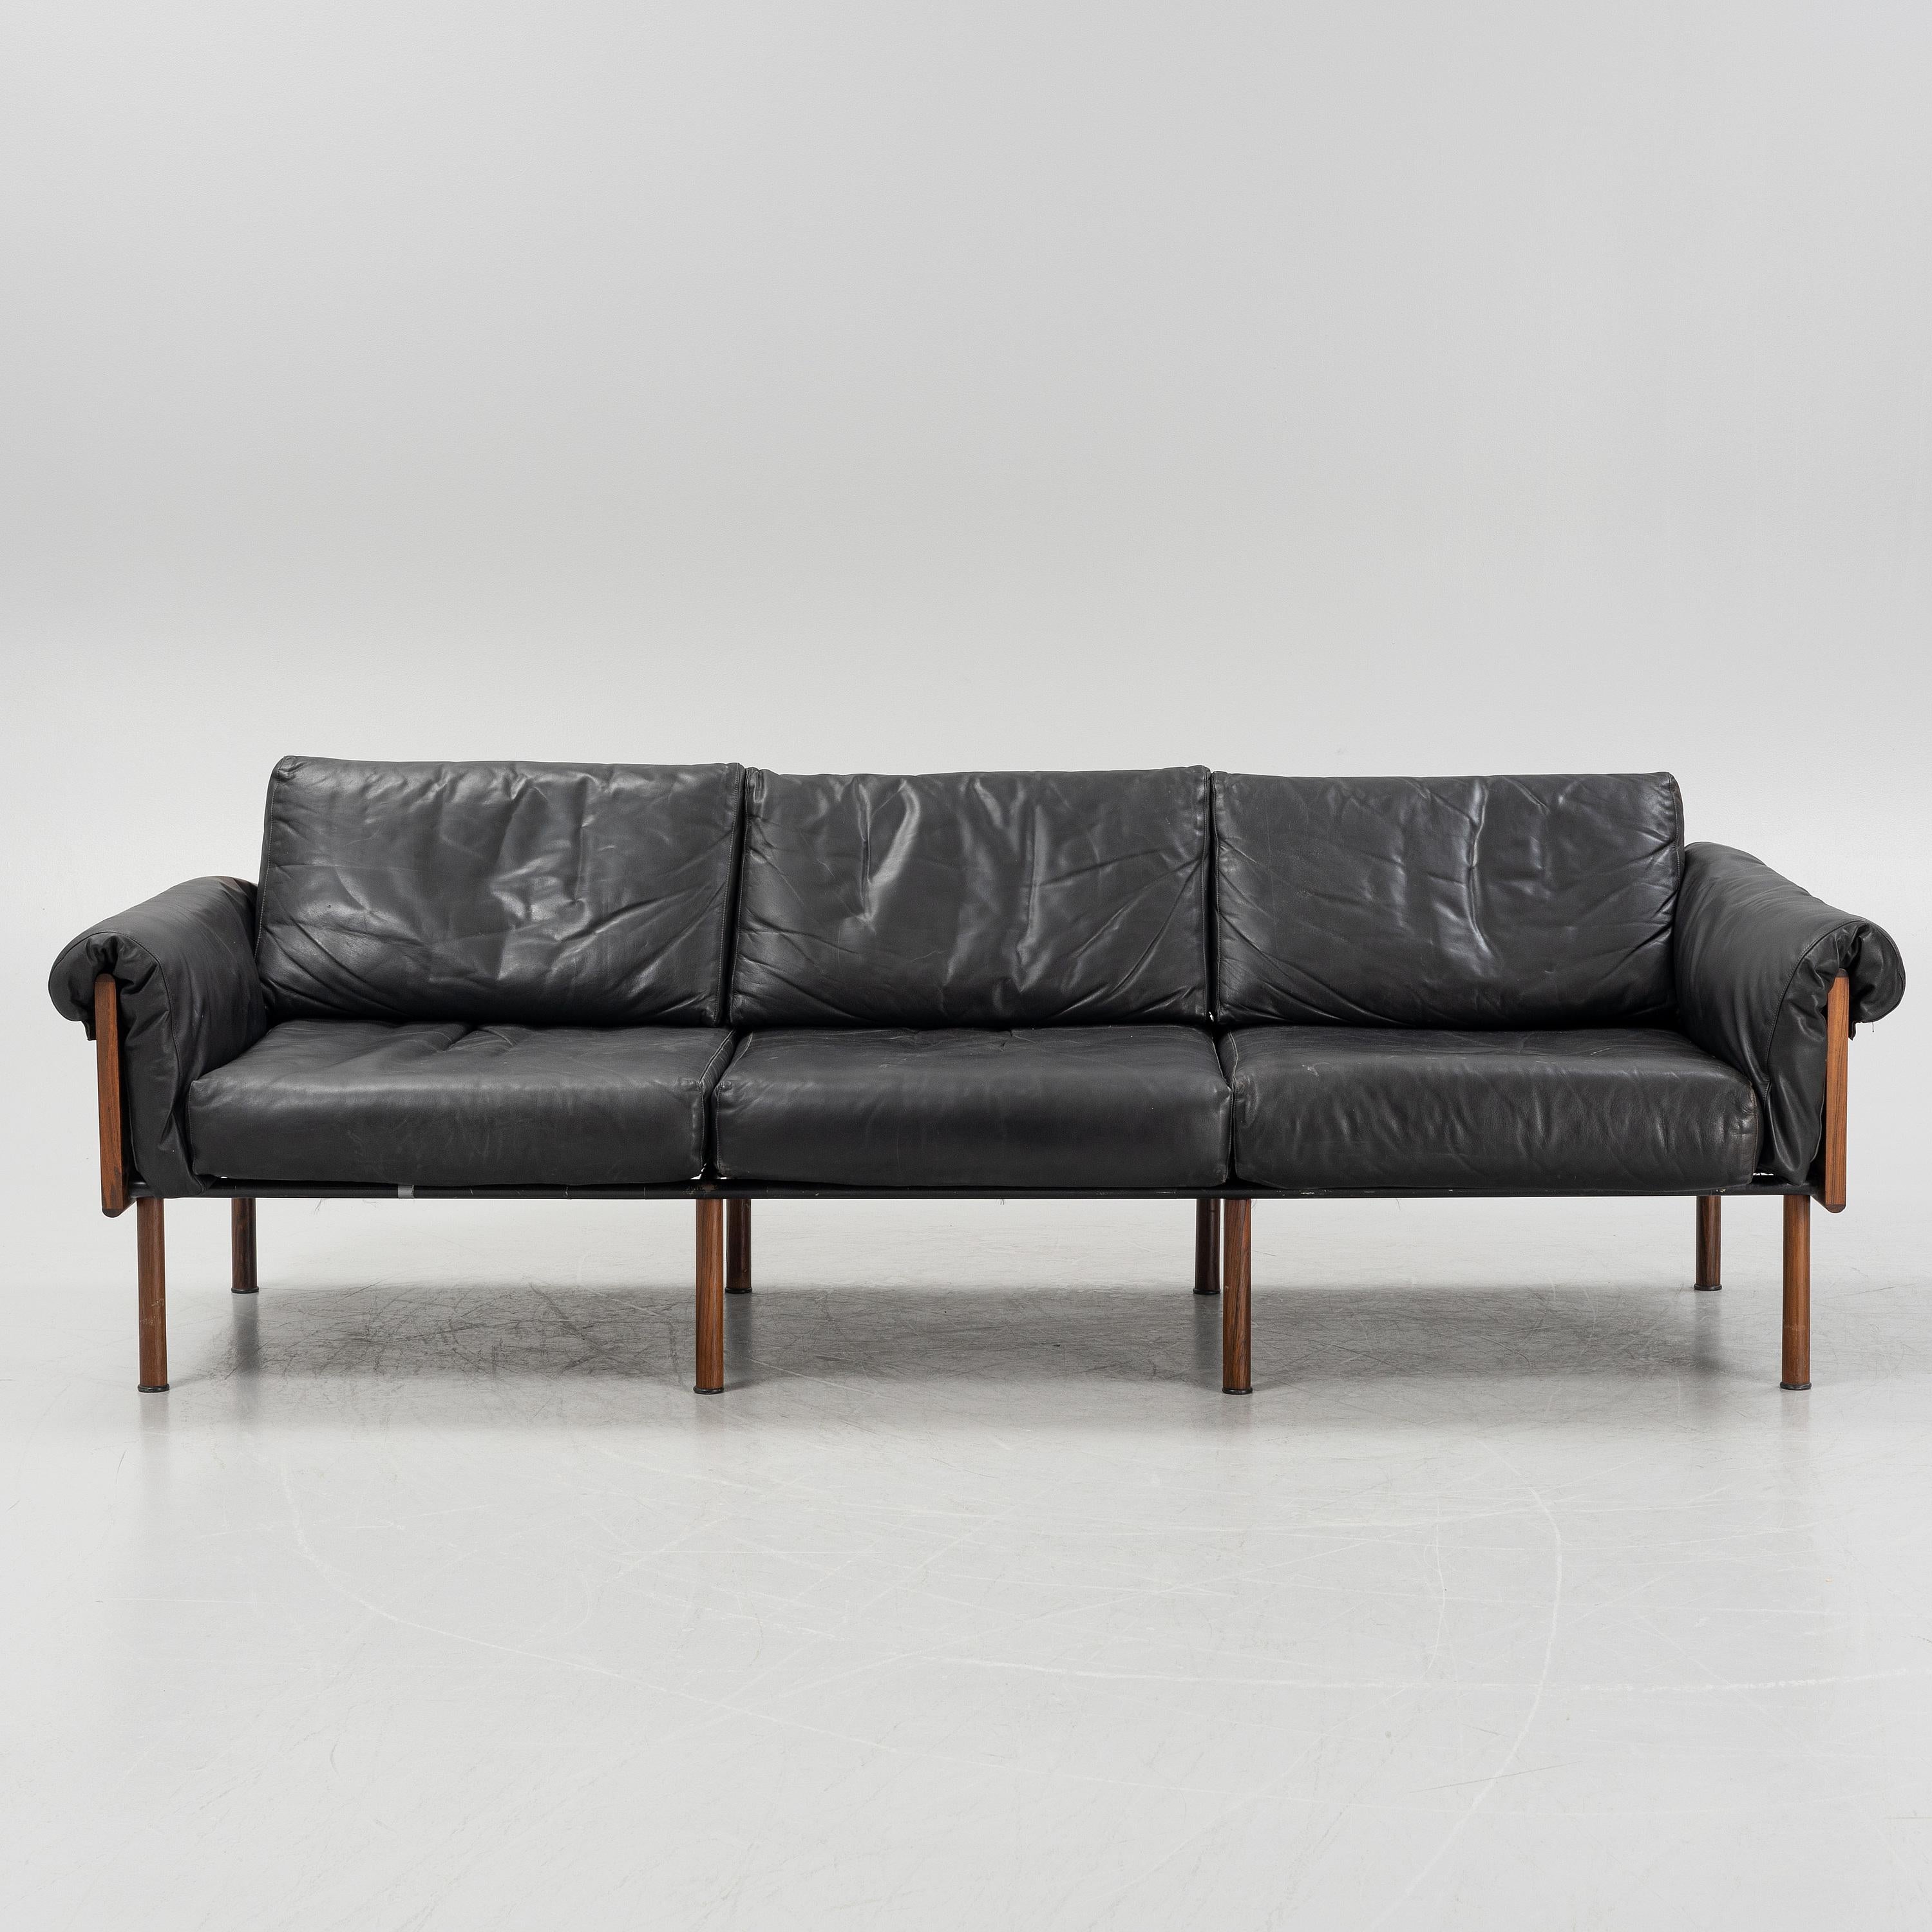 Yrjö Kukka a Rosewood Sofa Model Ateljee for Haimi Finland, 1960 In Good Condition For Sale In Paris, FR